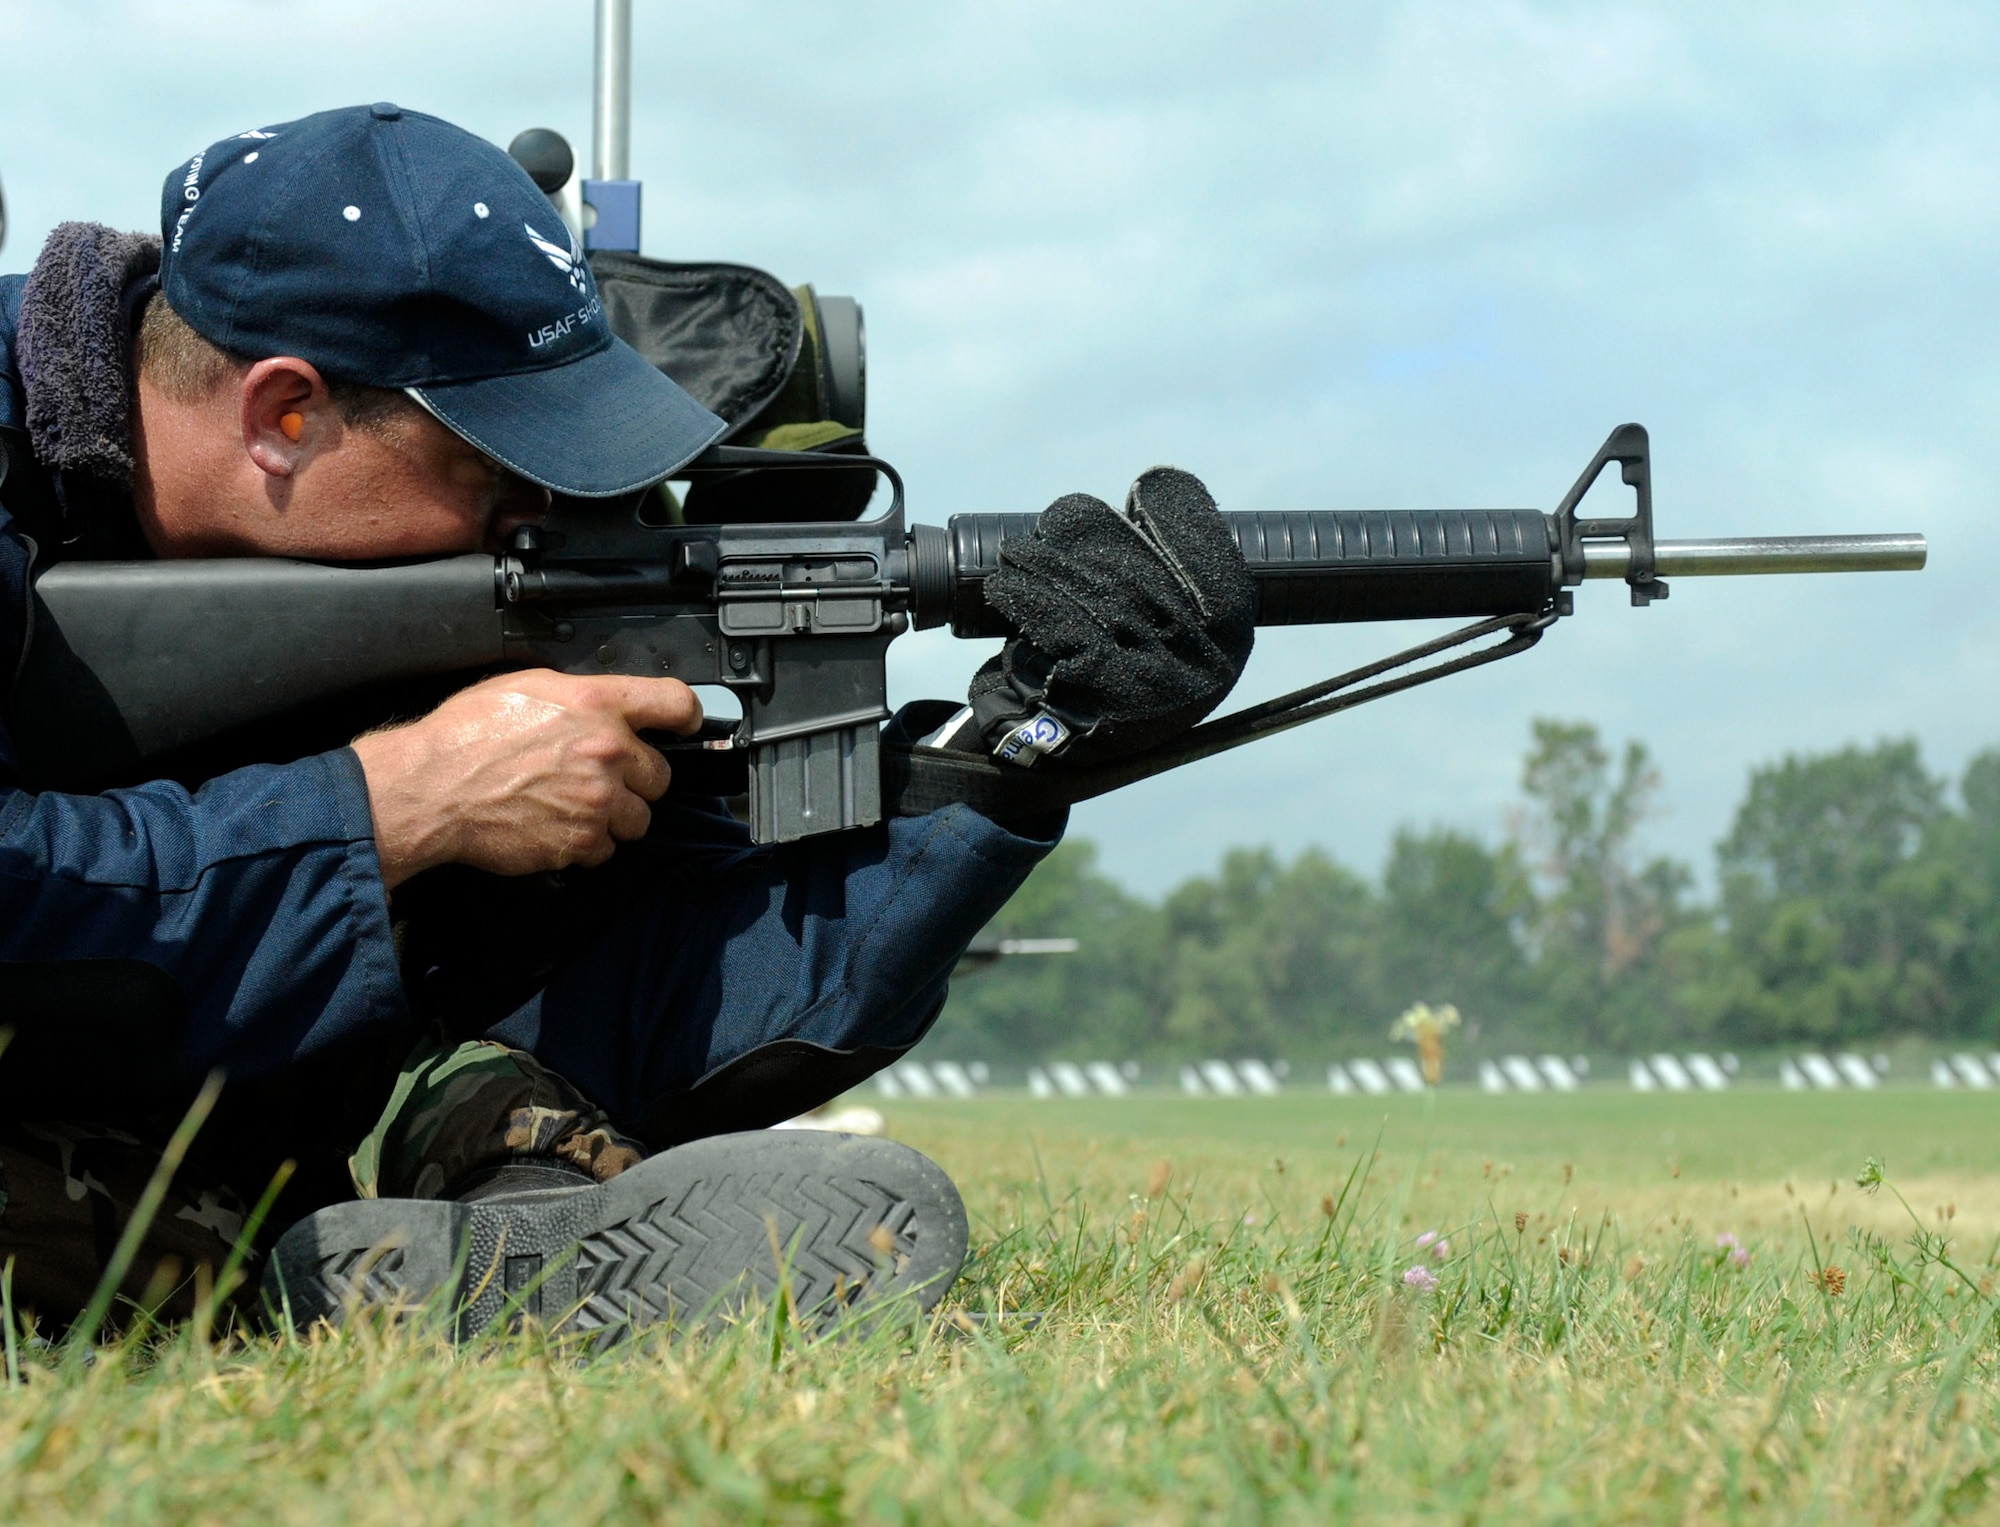 Master Sgt. Matthew Griffin, a member of the U.S. Air Force Shooting Team, prepares to fire at his target from the seated position during the 200-meter portion of the high power rifle competition of the 2009 National Rifle and Pistol Championships at Camp Perry, Ohio. Sergeant Griffin is a Reservist from the 934th Airlift Wing at the Minneapolis Air Reserve Station, Minneapolis, Minn. (U.S. Air Force photo/Staff Sgt. Matthew Bates) 